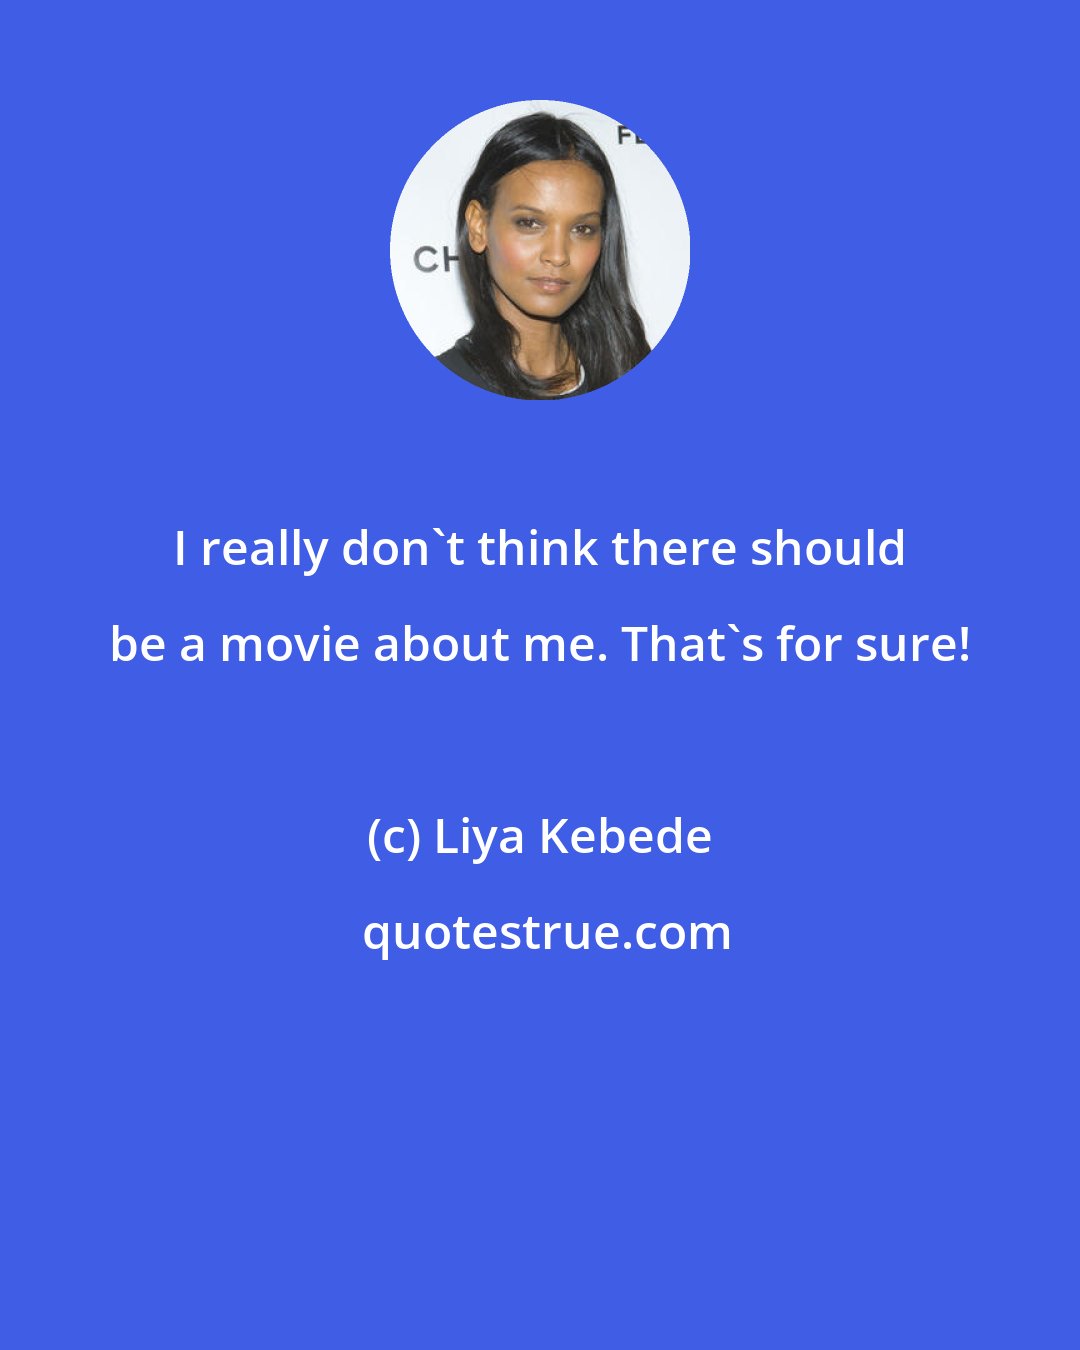 Liya Kebede: I really don't think there should be a movie about me. That's for sure!